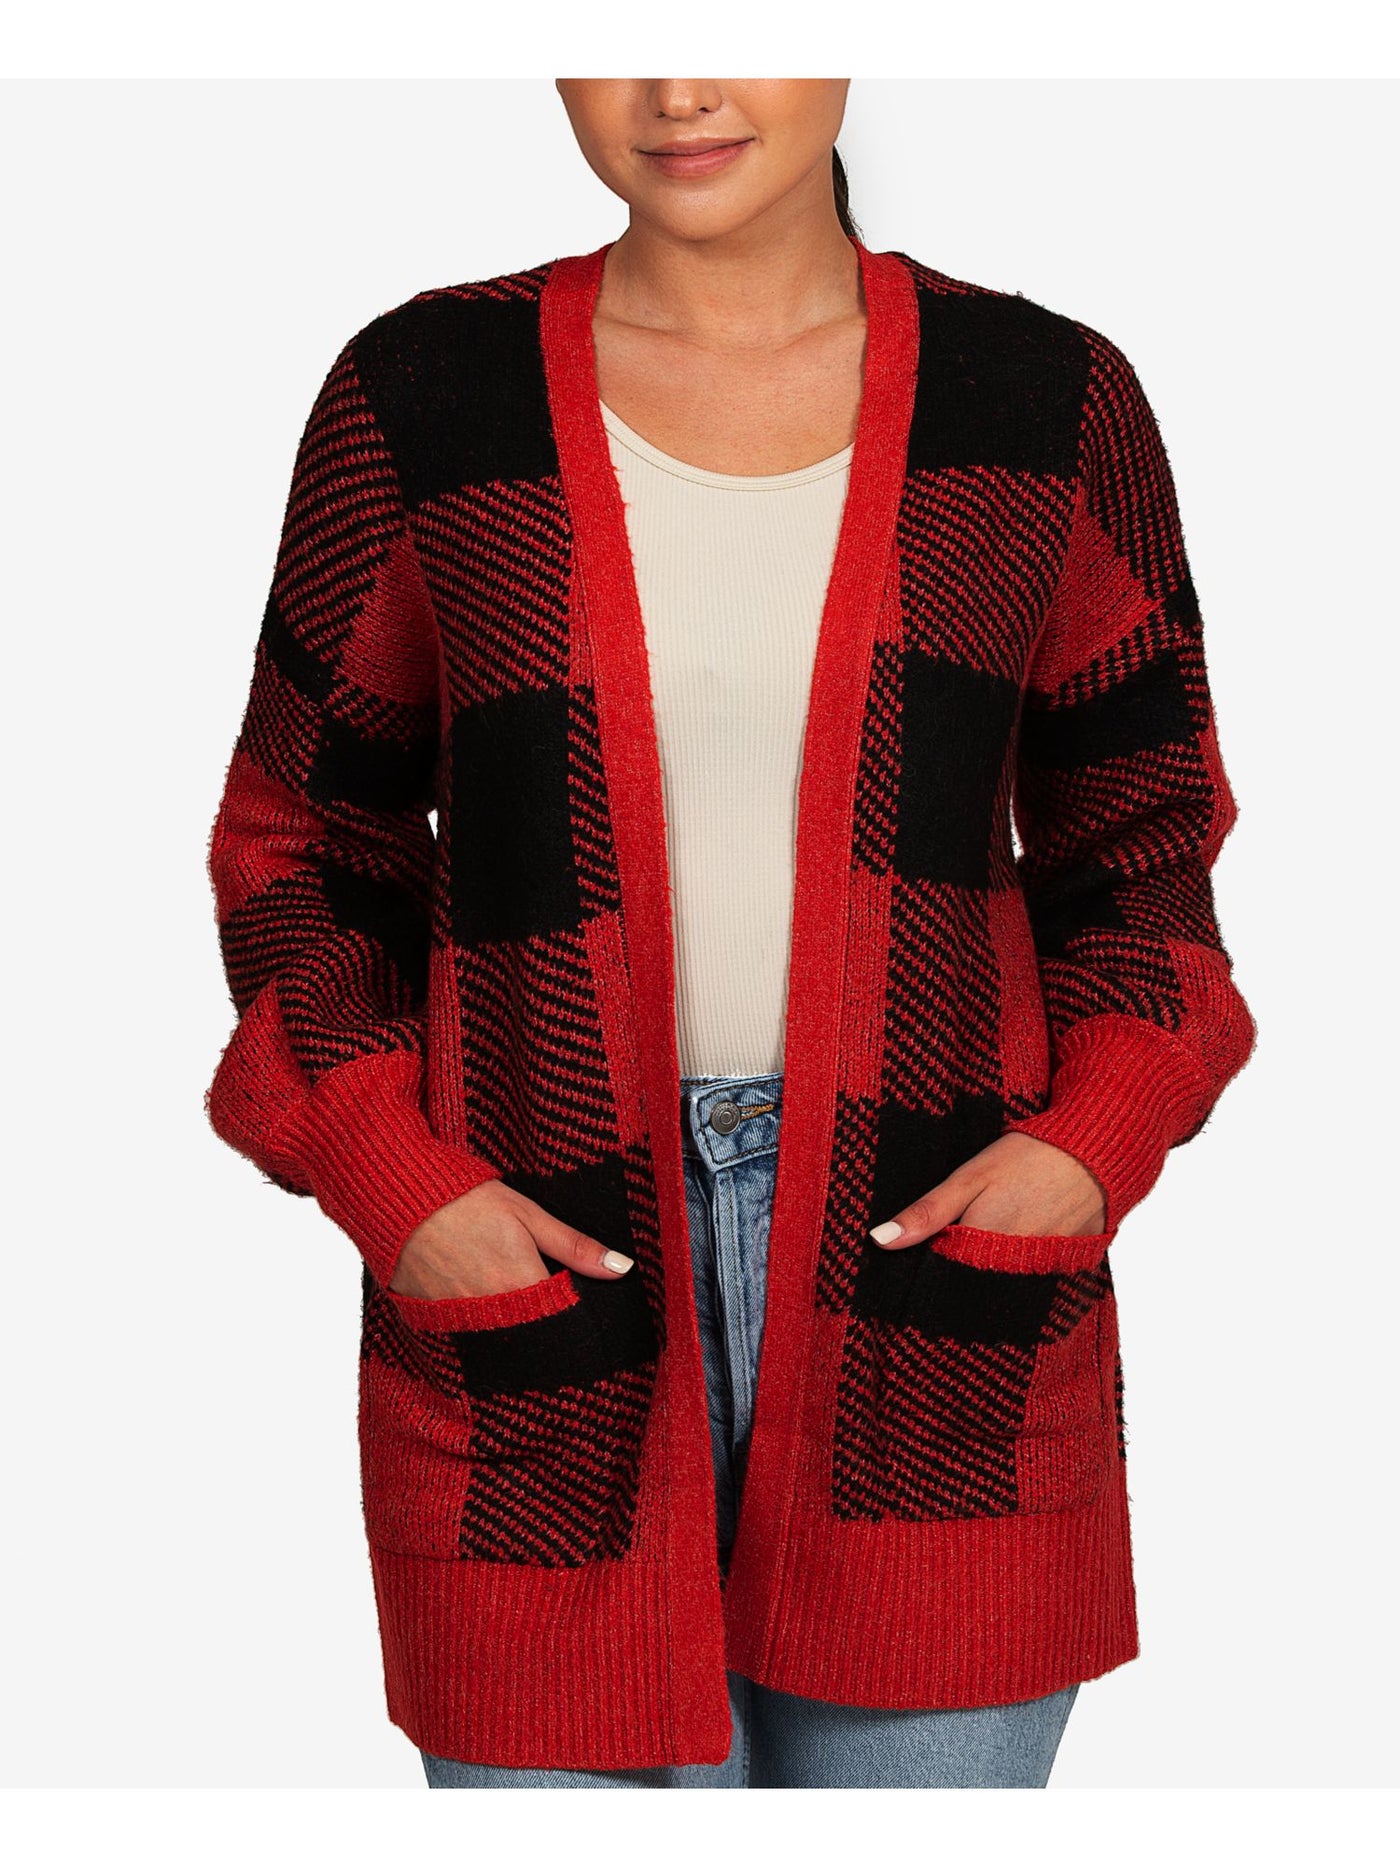 HIPPIE ROSE Womens Red Knit Pocketed Ribbed Cardigan Plaid Balloon Sleeve Open Front Sweater Juniors M